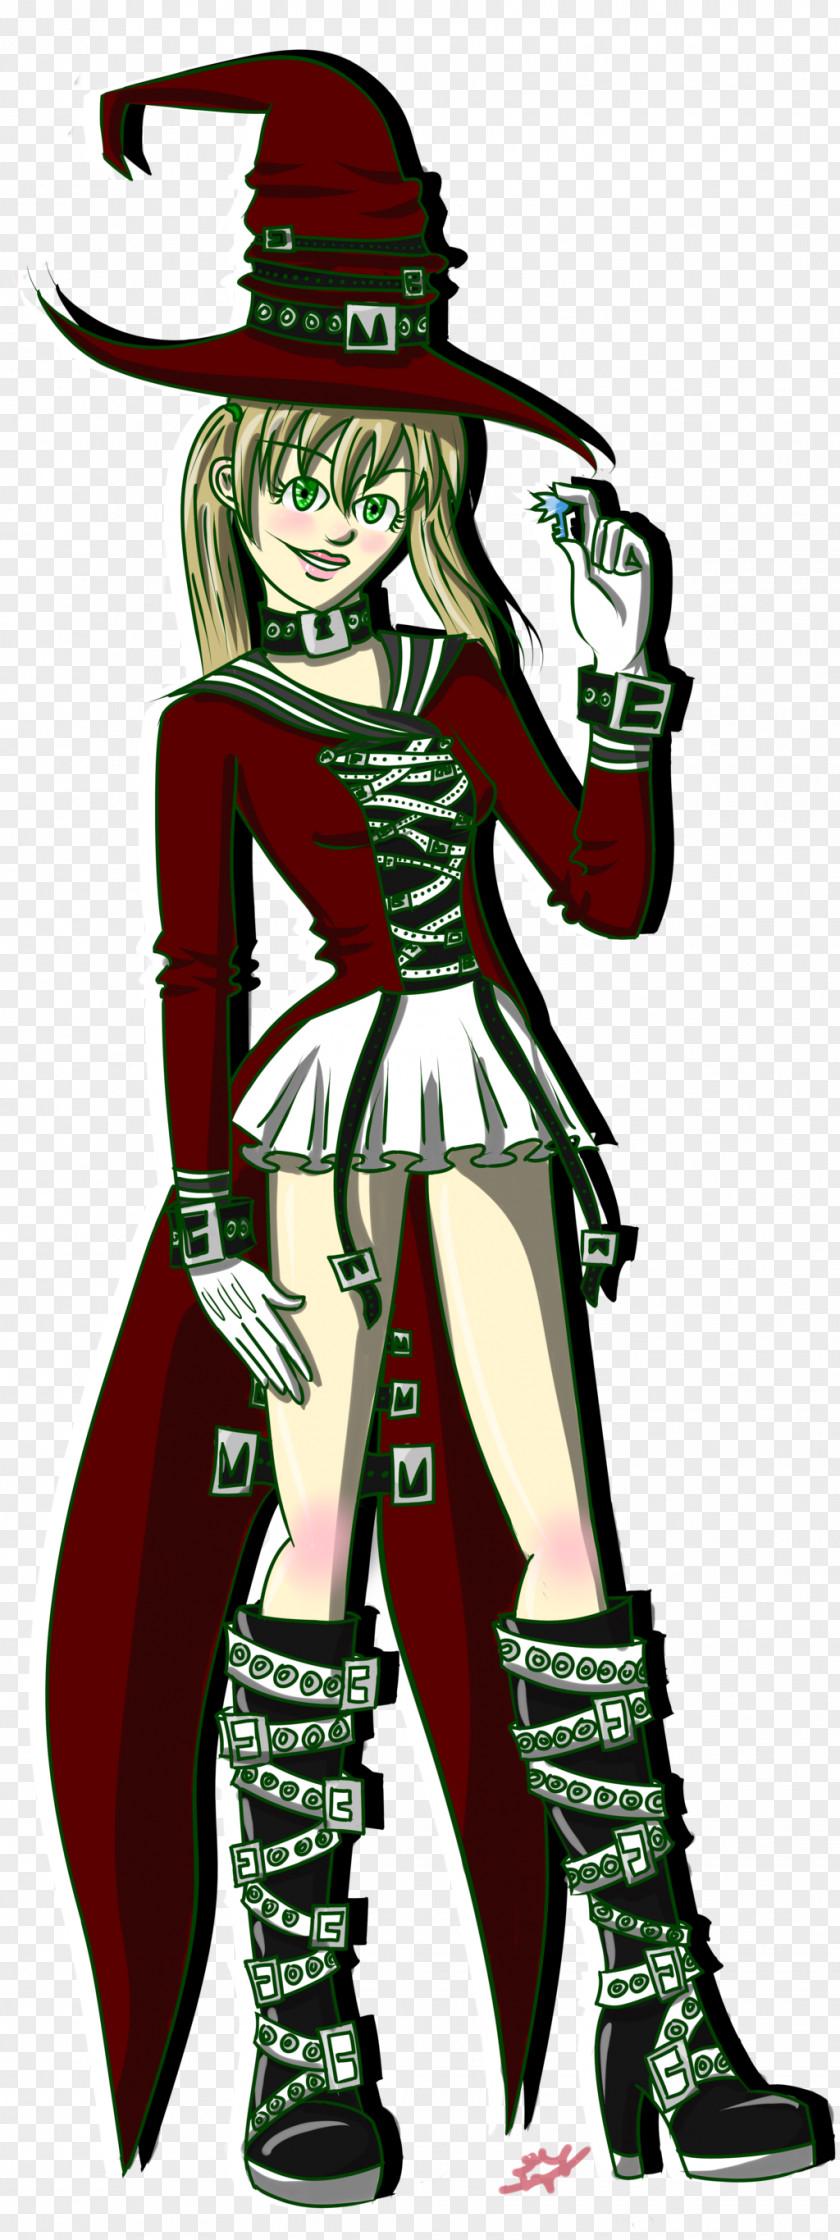 Witch Fiction Cartoon Costume Design PNG